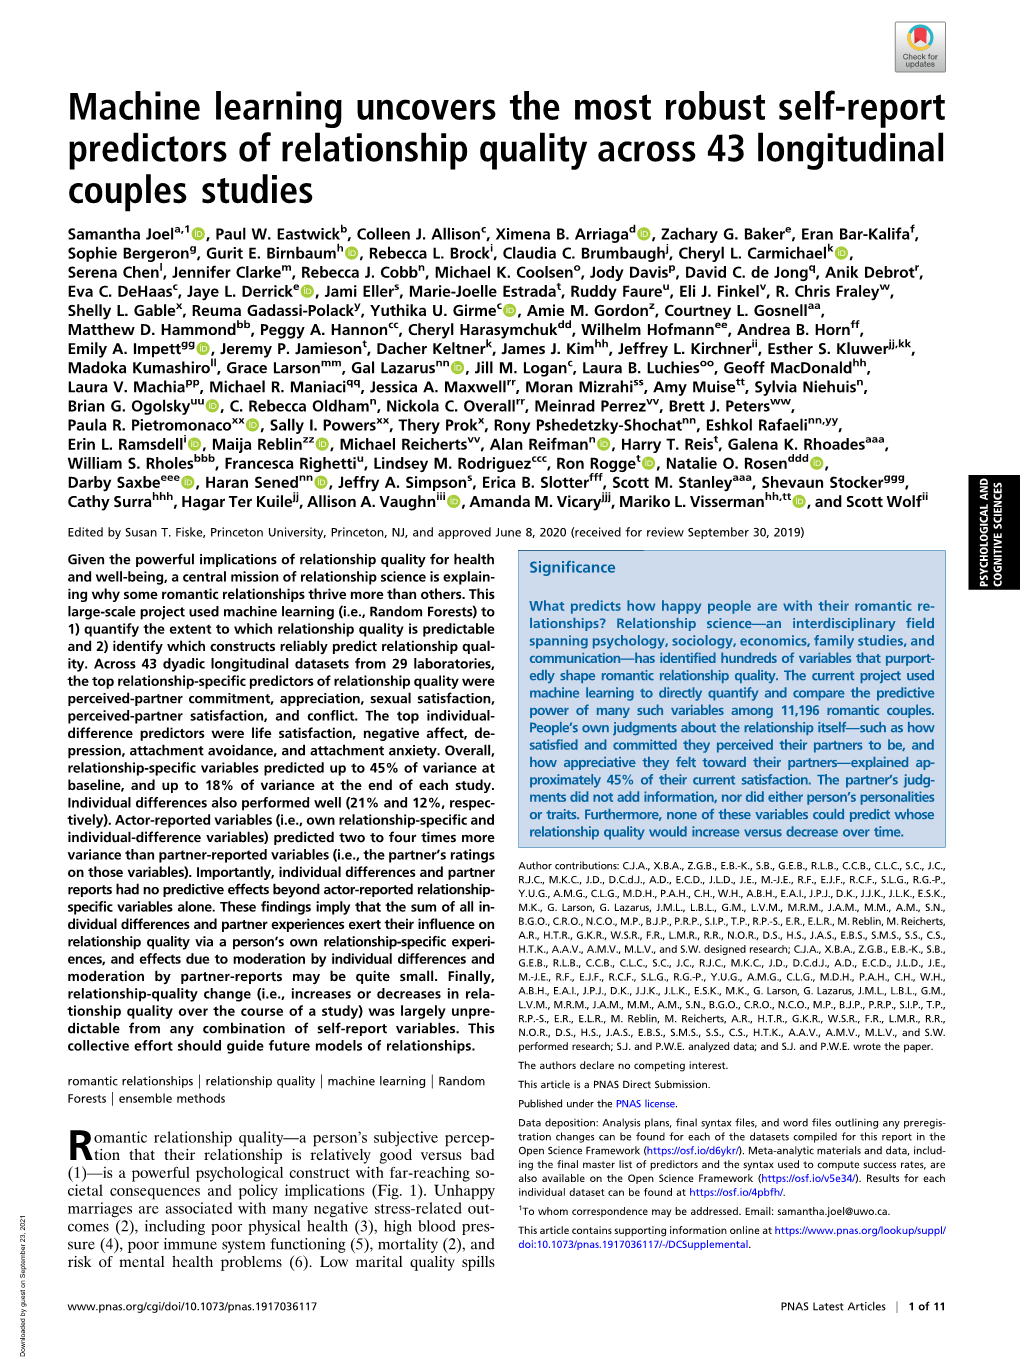 Machine Learning Uncovers the Most Robust Self-Report Predictors of Relationship Quality Across 43 Longitudinal Couples Studies